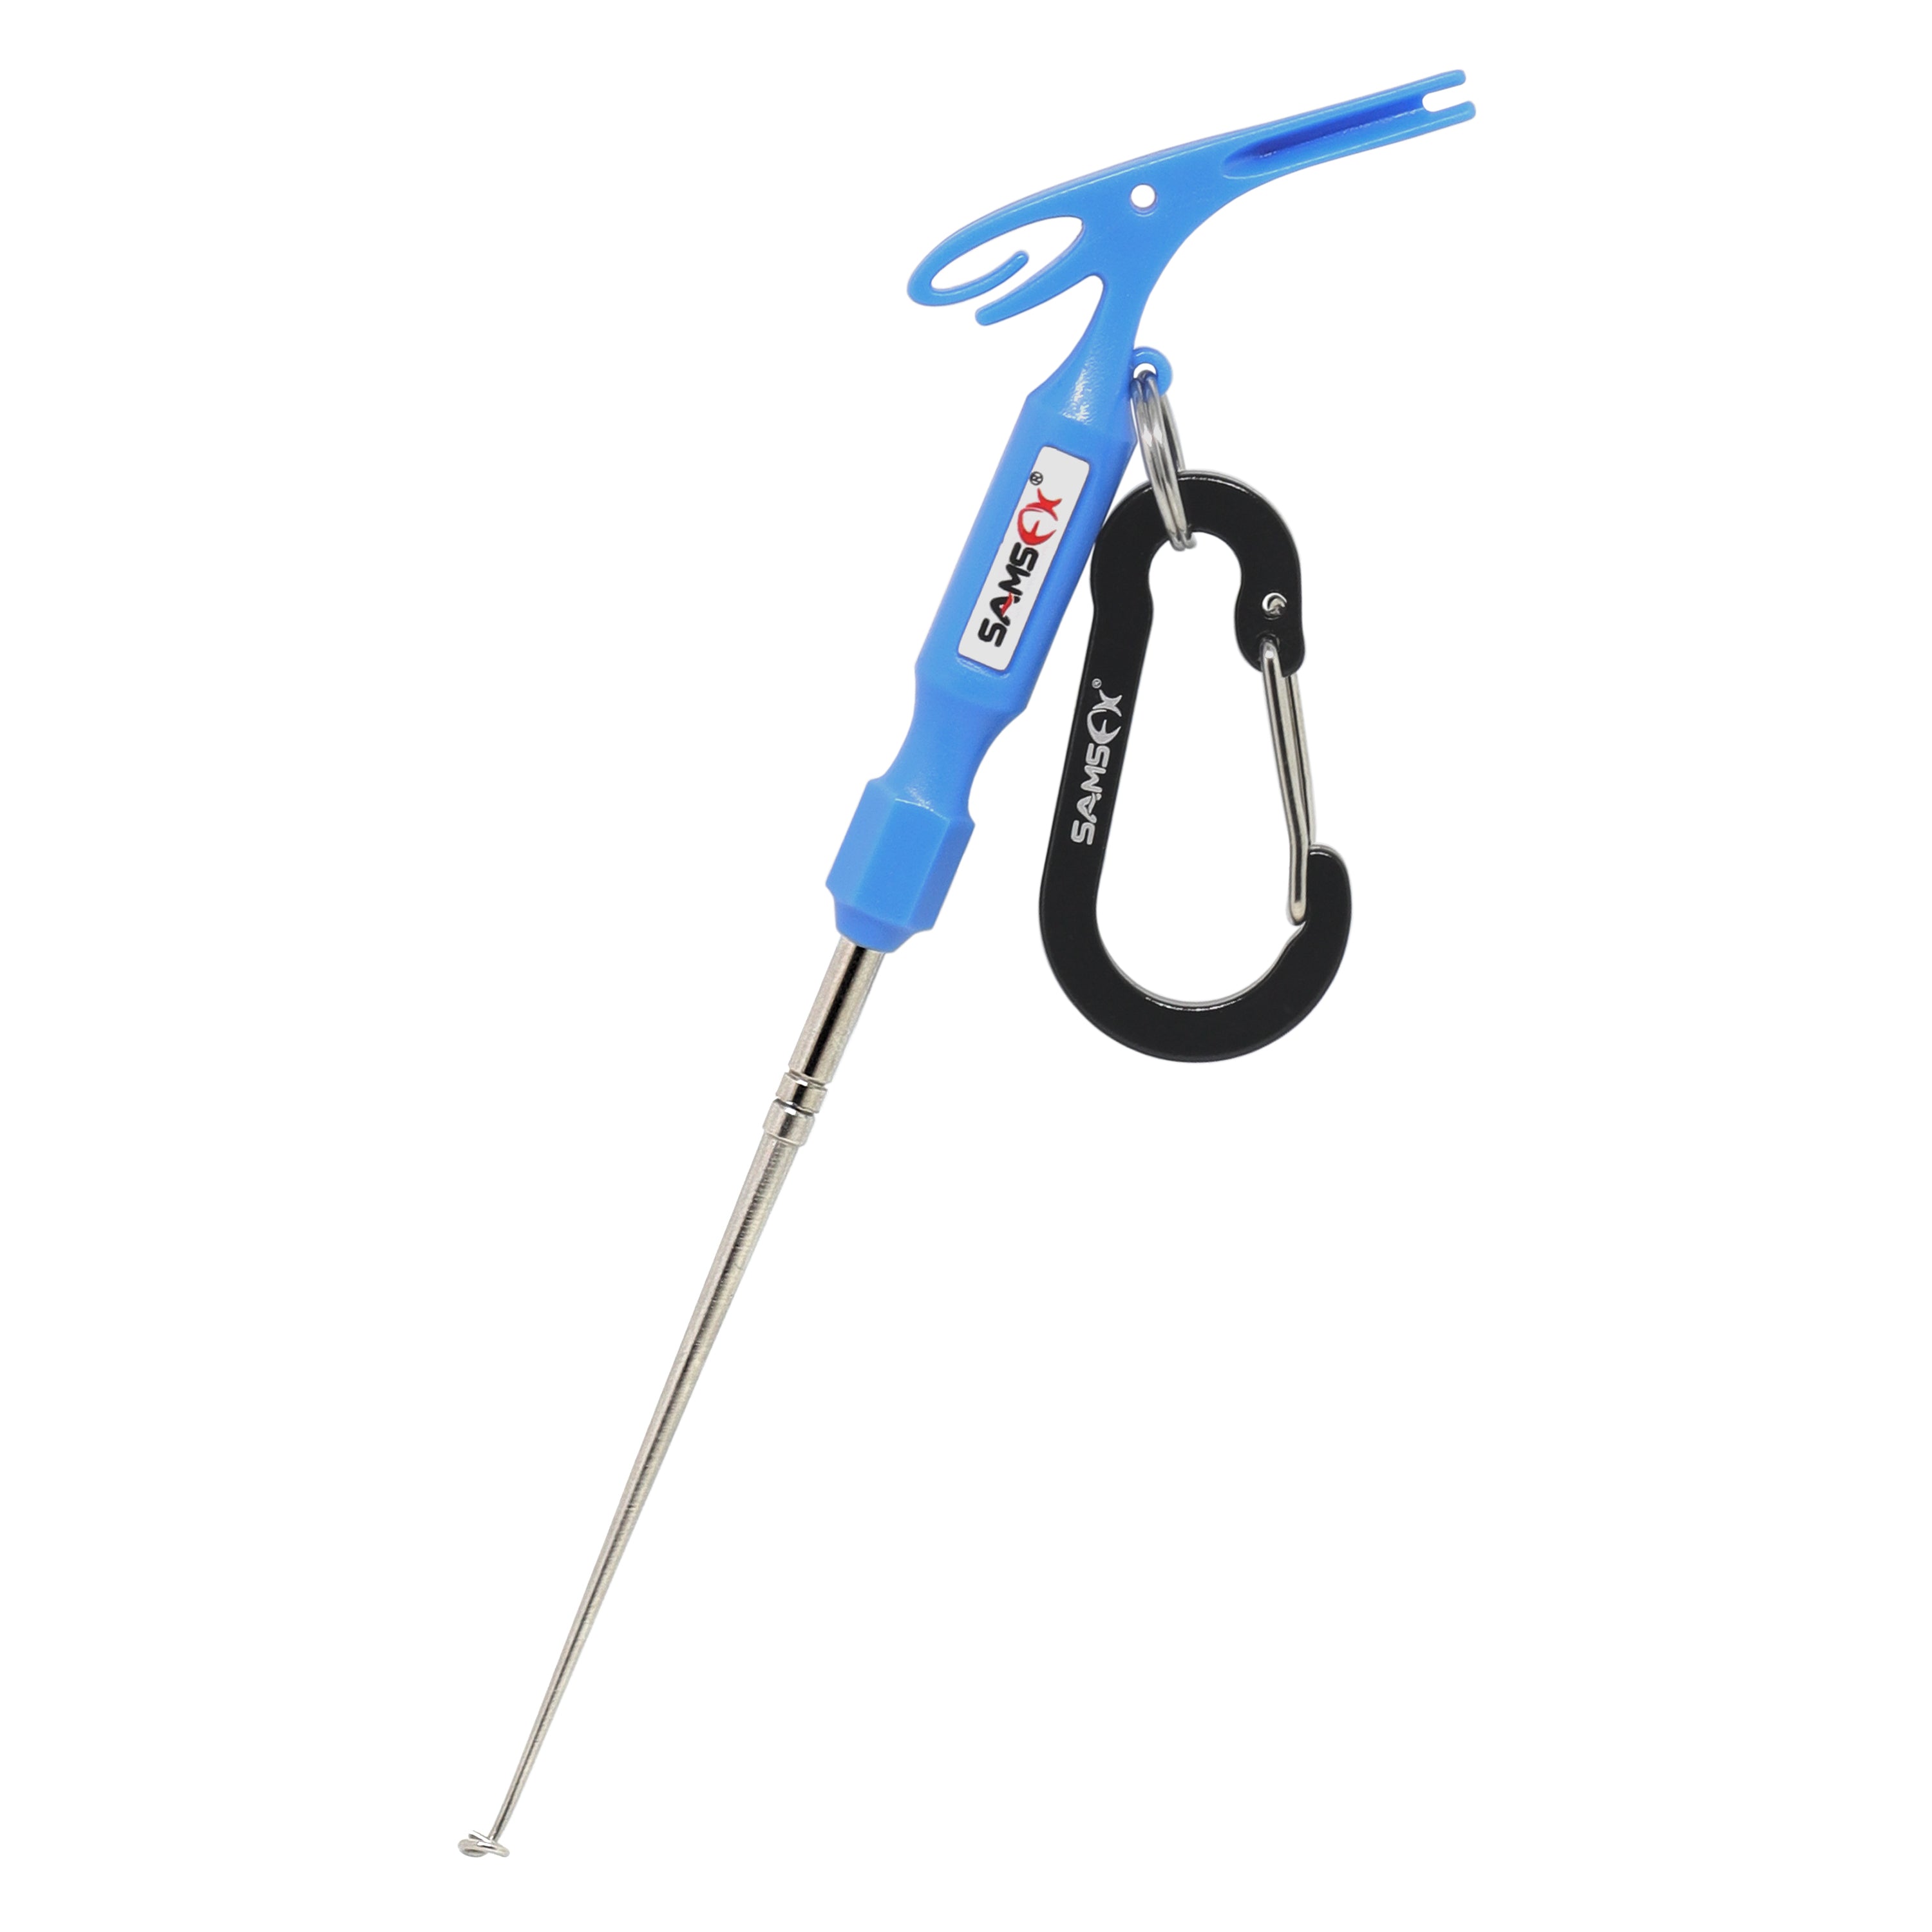  Fishing Quick Knot Tying Tools Includes Stainless